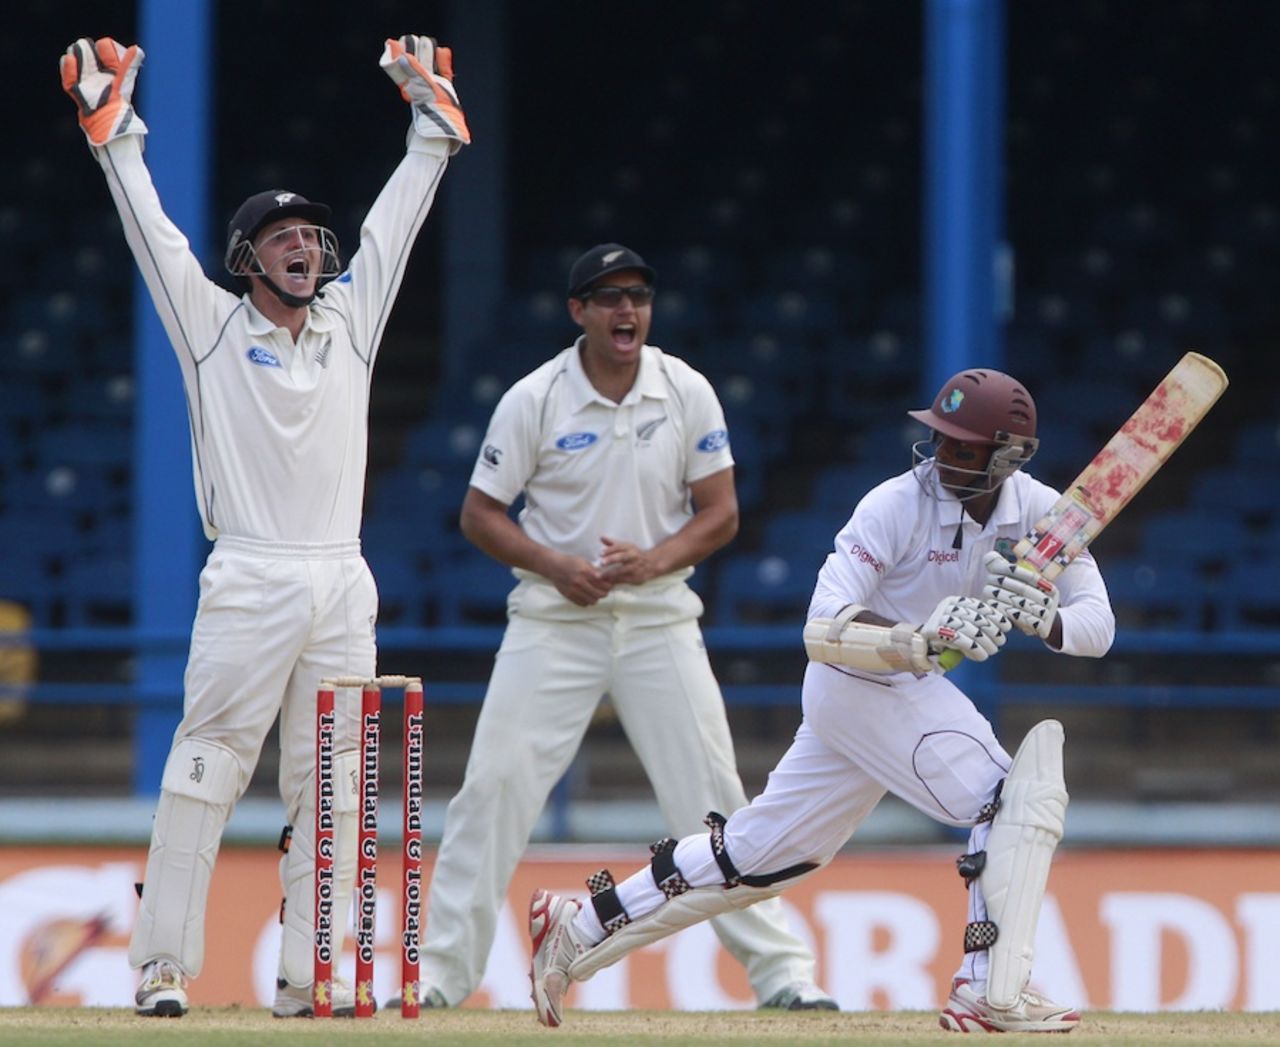 Shivnarine Chanderpaul was lbw padding up, West Indies v New Zealand, 2nd Test, Trinidad, 3rd day, June 18, 2014